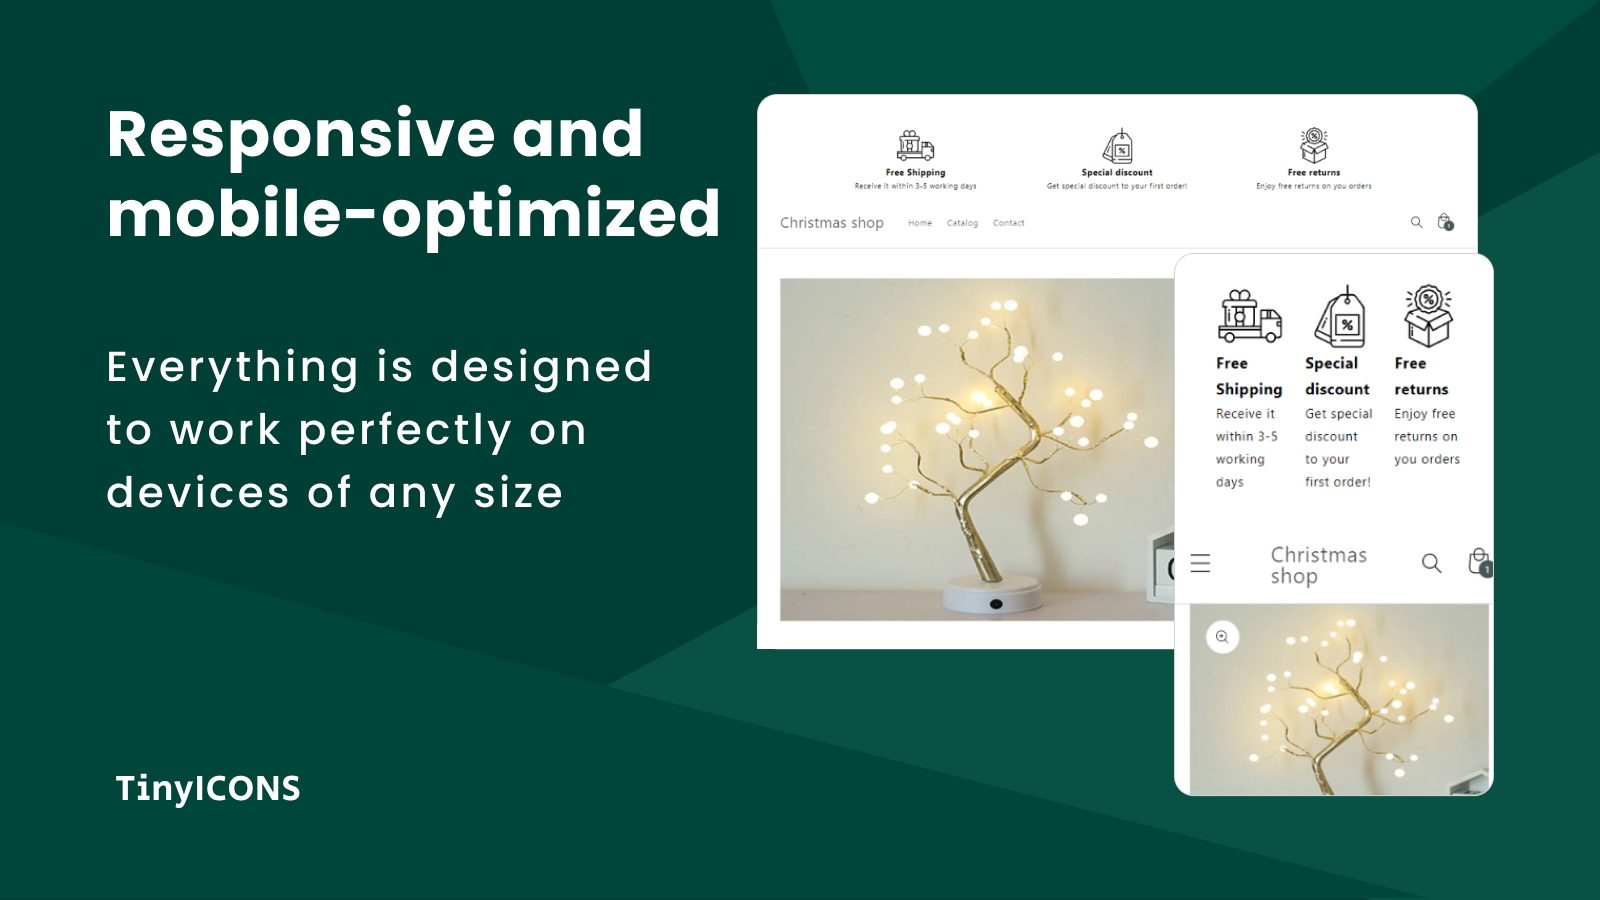 Responsive and mobile-optimized